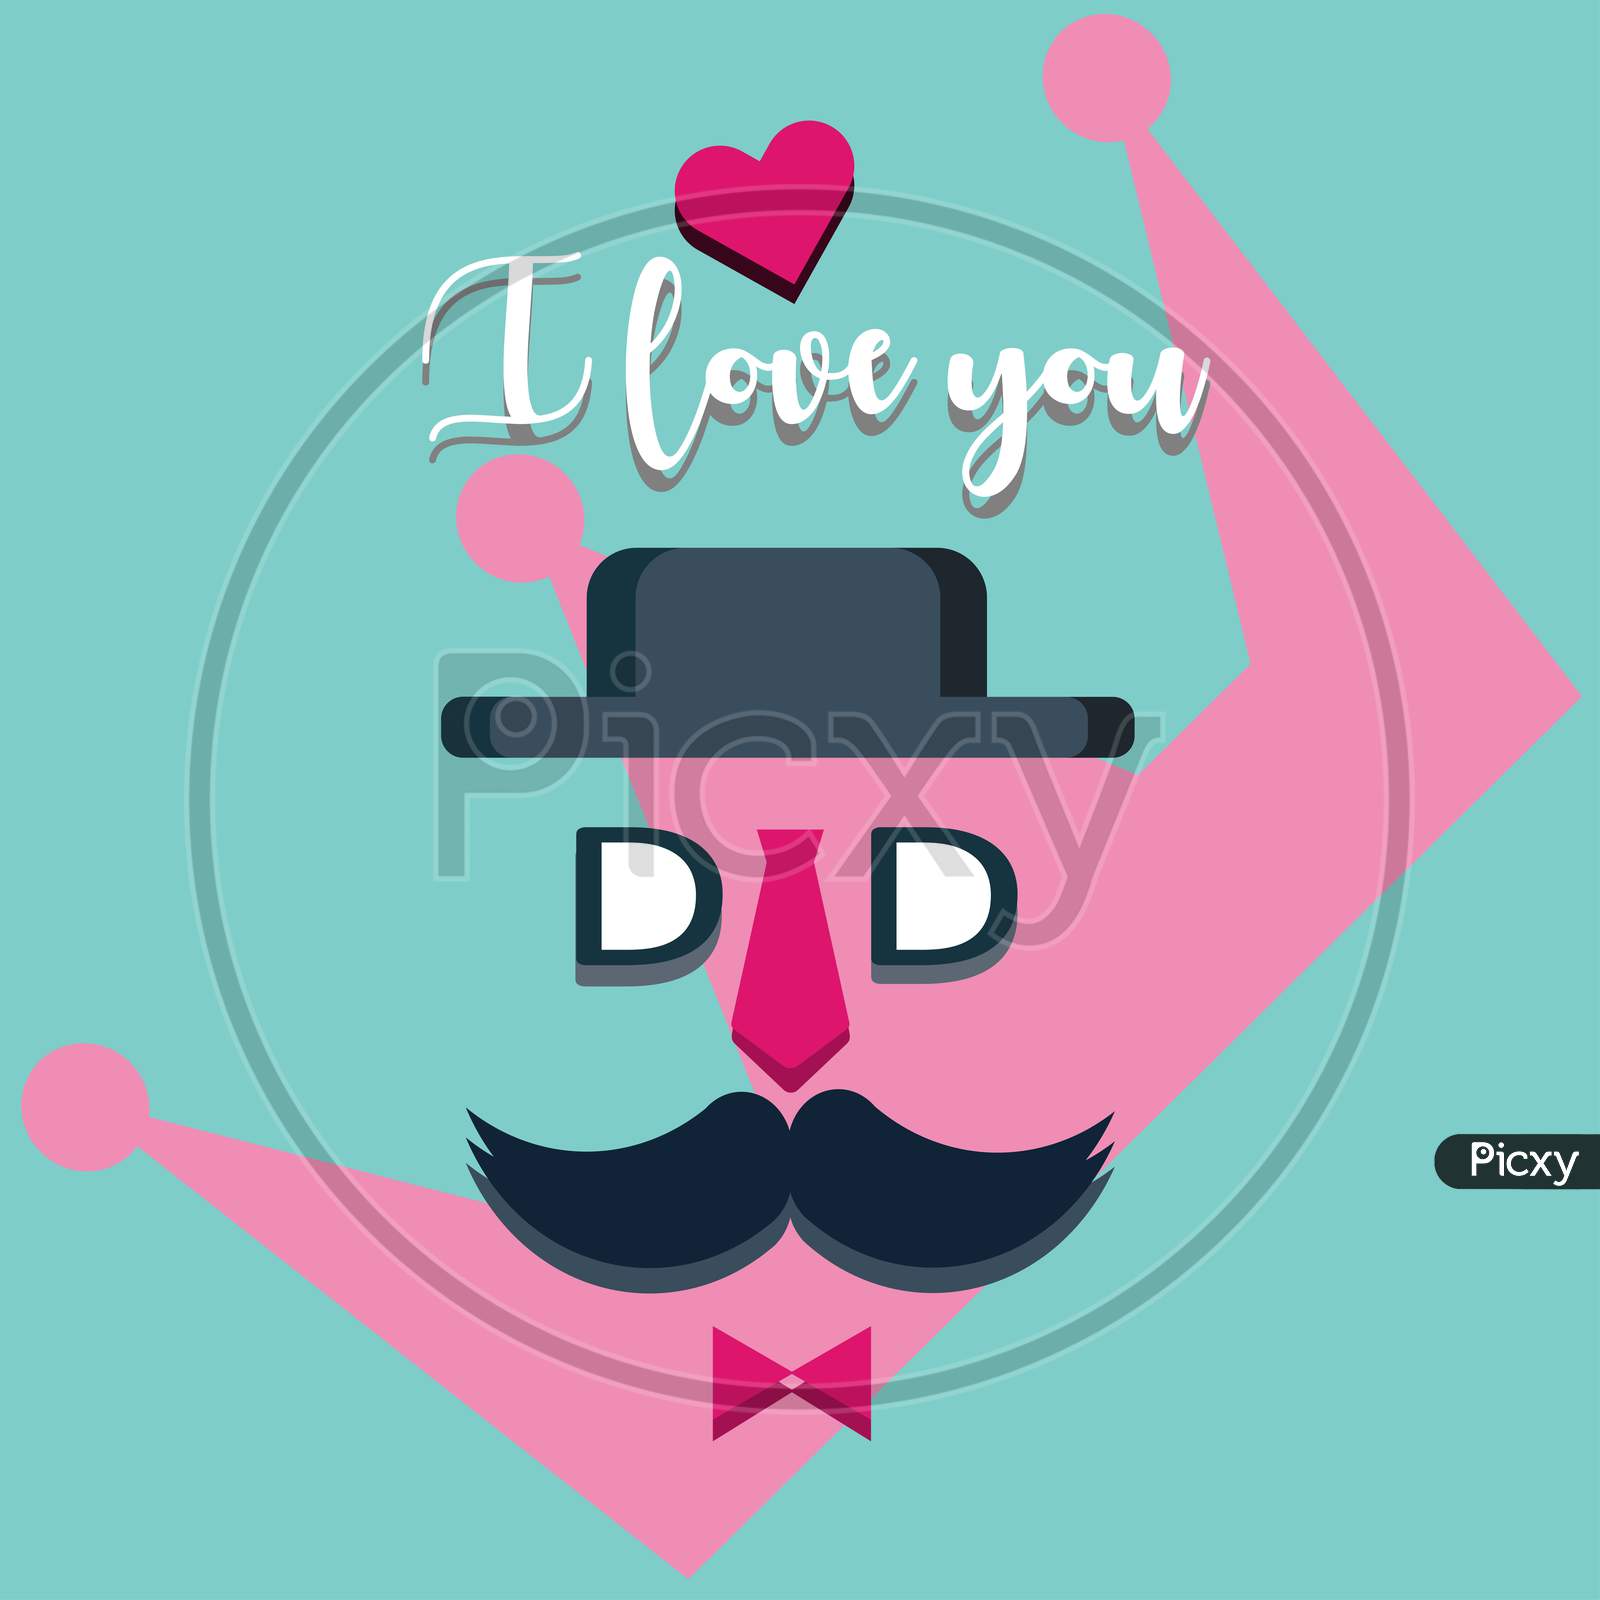 I Love You Dad, Father'S Day Poster Vector Illustration